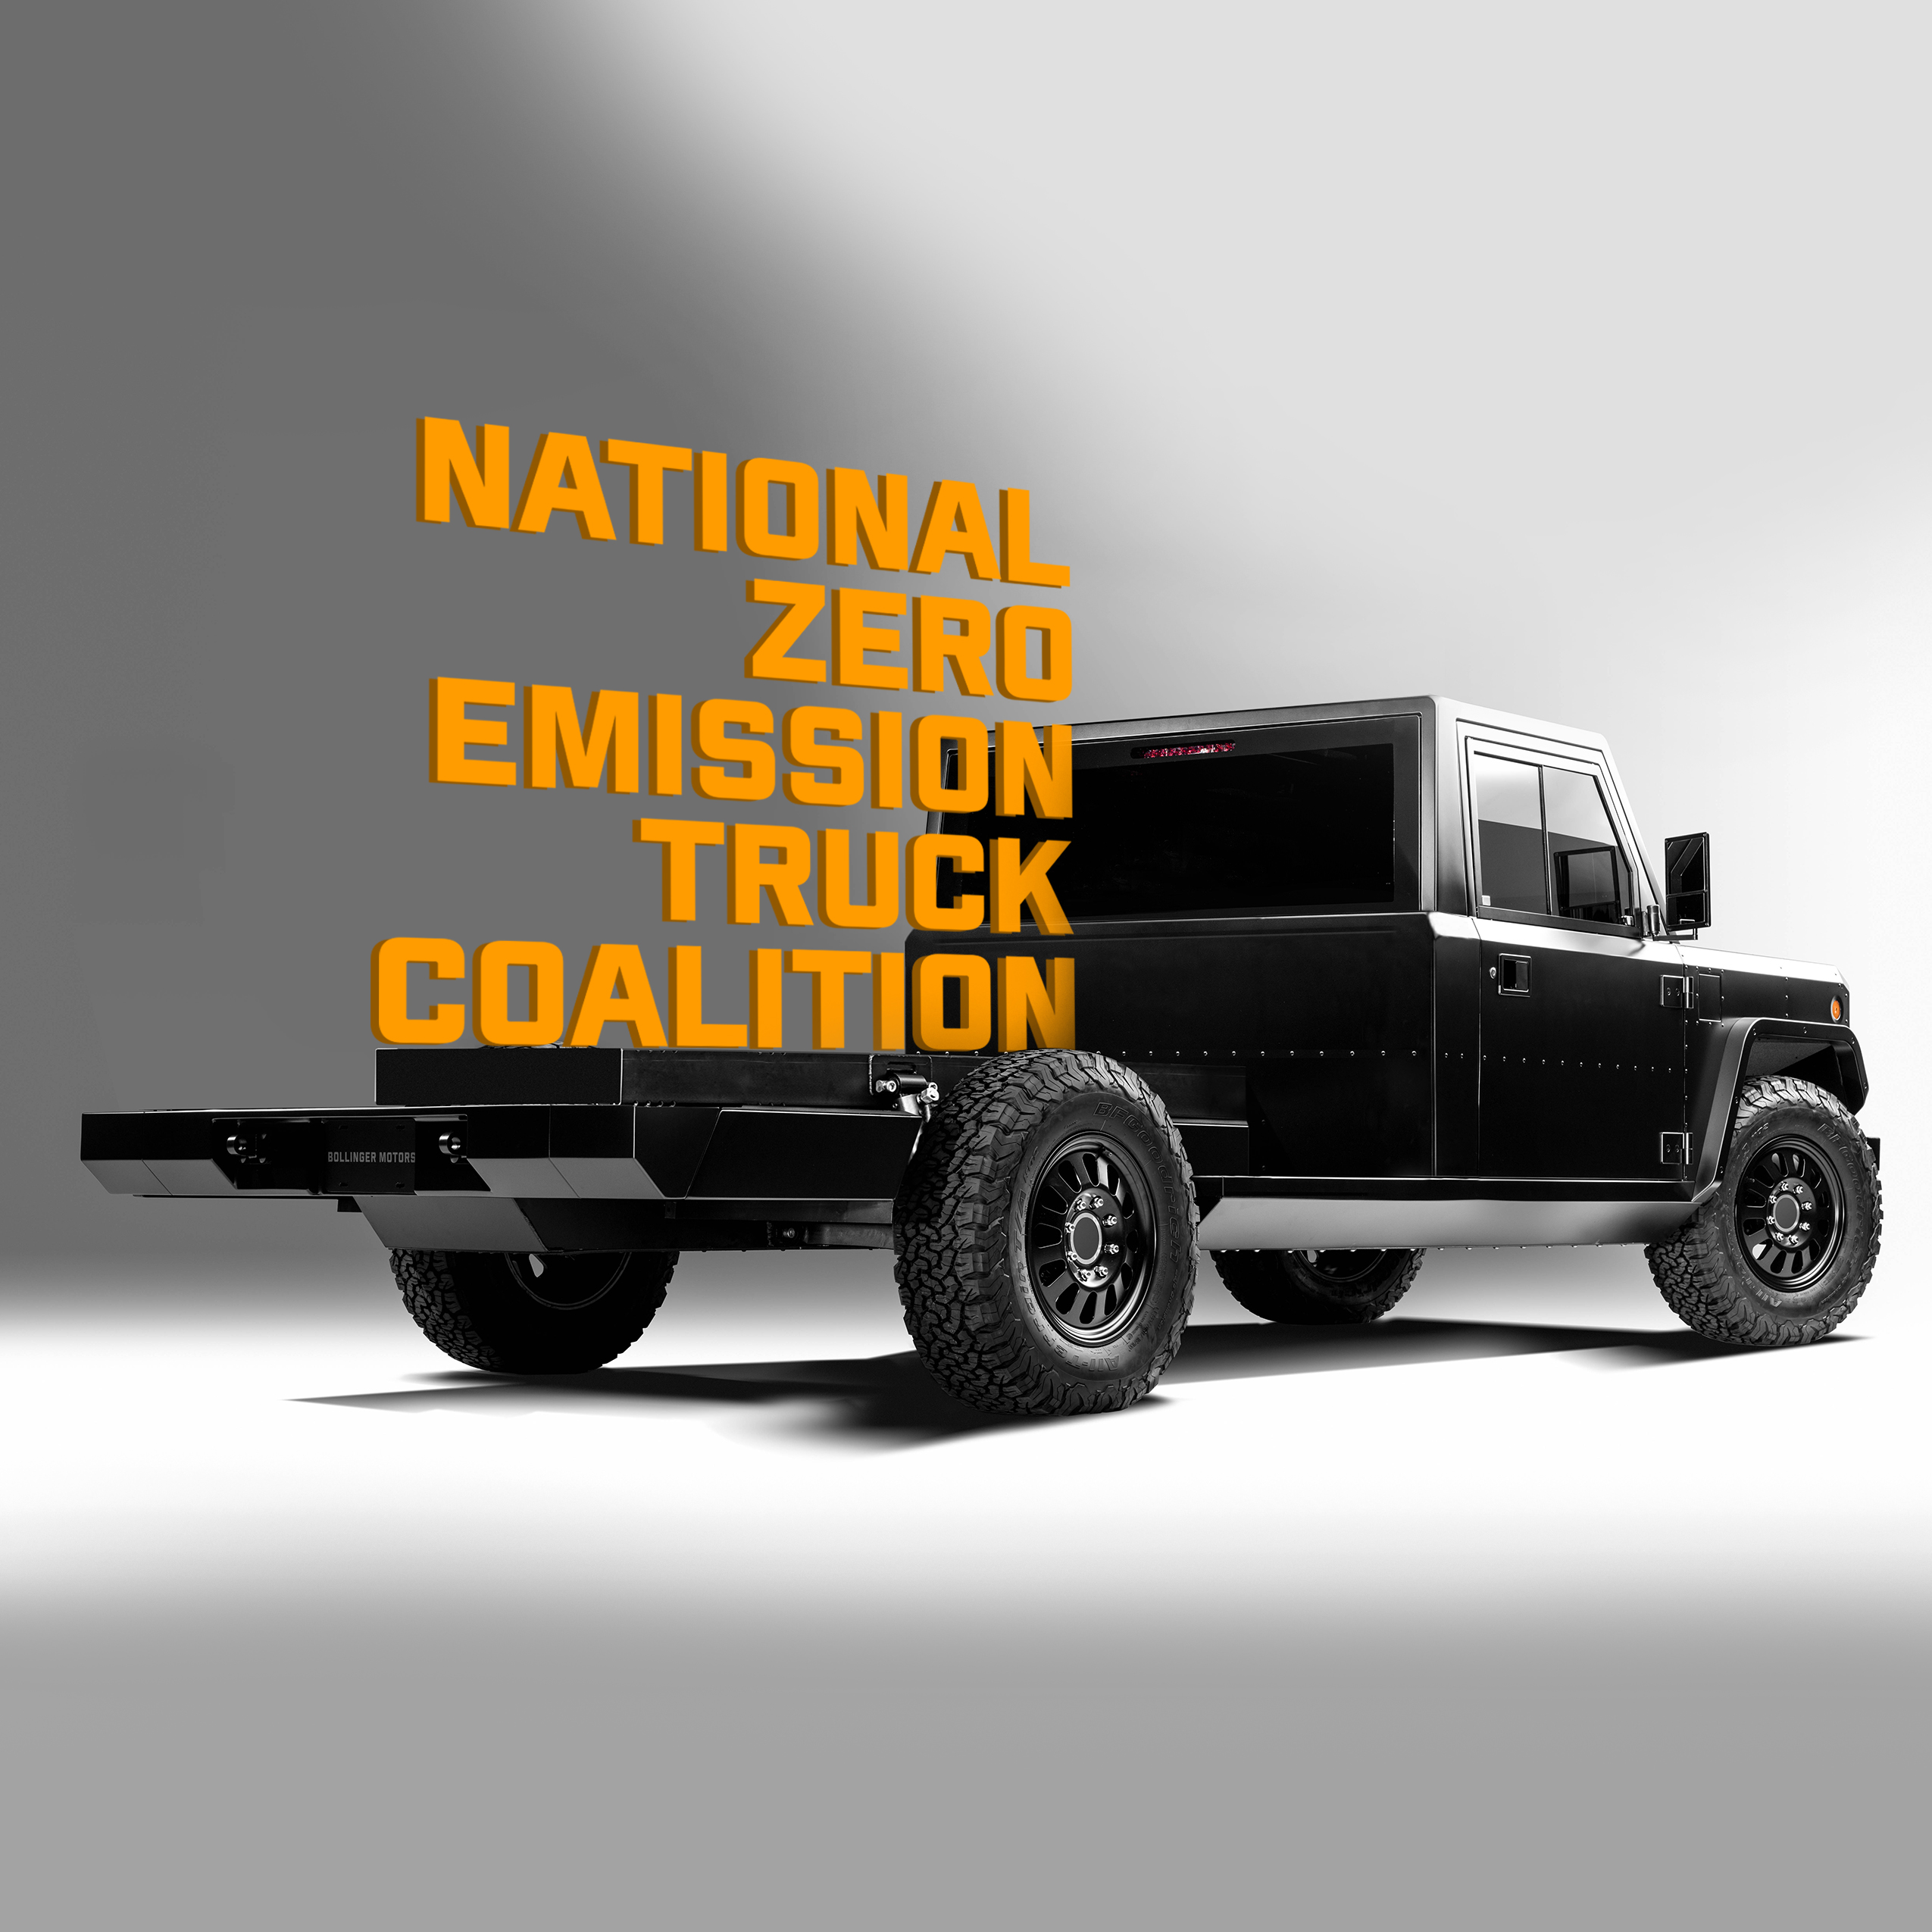 National Zero Emission Truck Coalition title page showing the B2 Chassis Cab